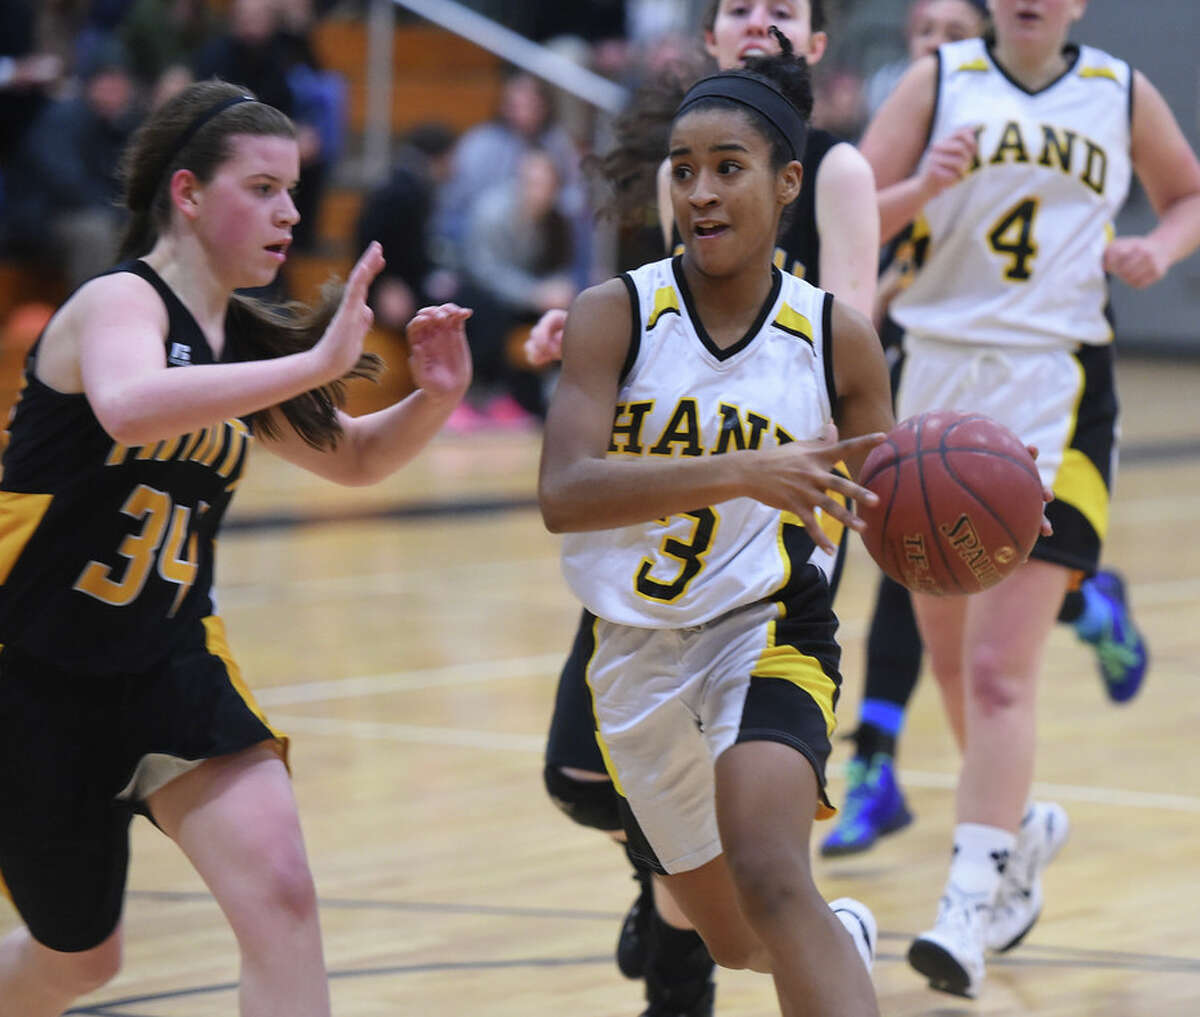 Hand’s Gabrielle Martin drives during the SCC girls basketball semifinals at Law Monday night (Photo Arnold Gold)